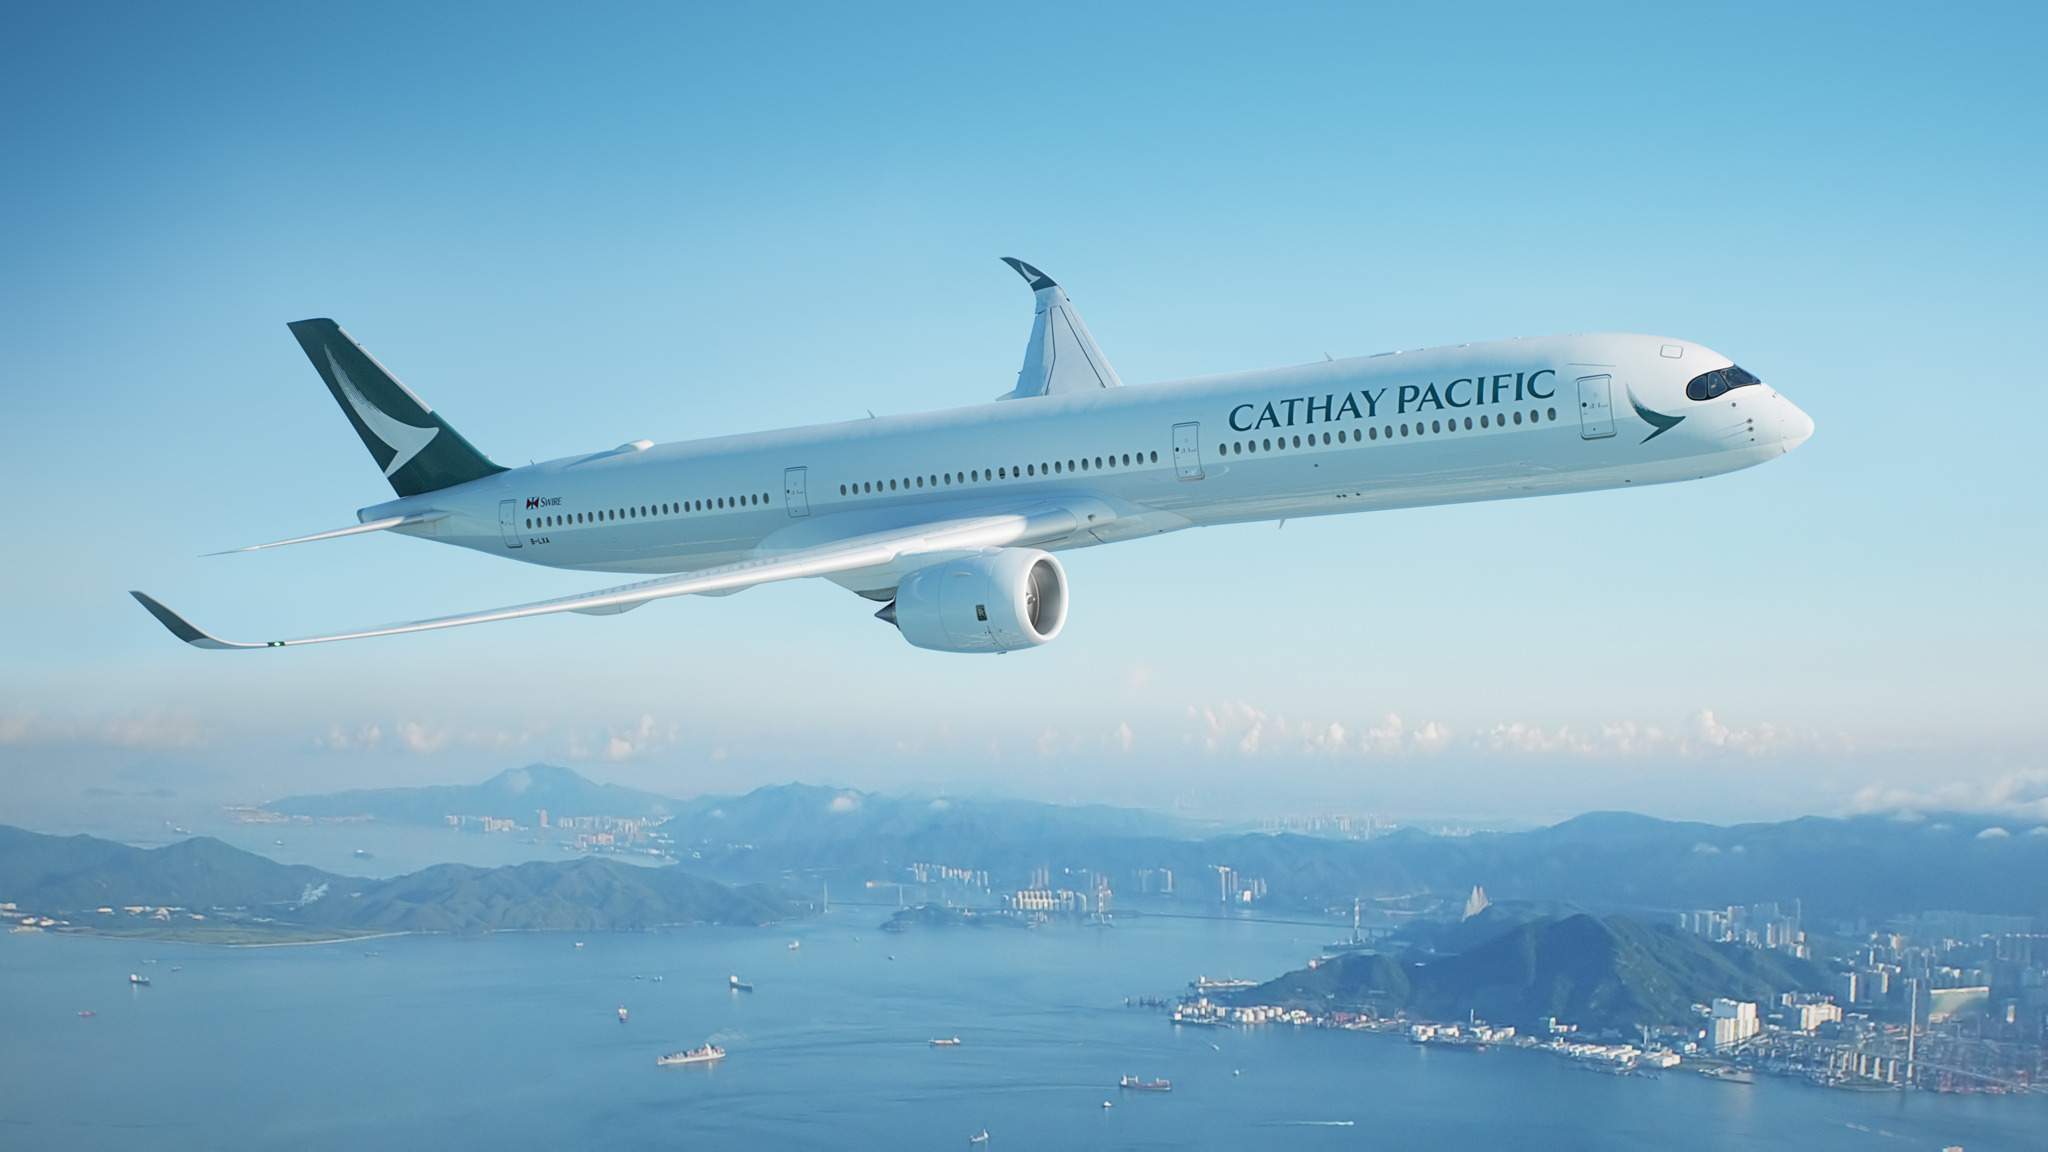 Cathay Pacific Reports Improving Travel Demand Ahead of Festive Season